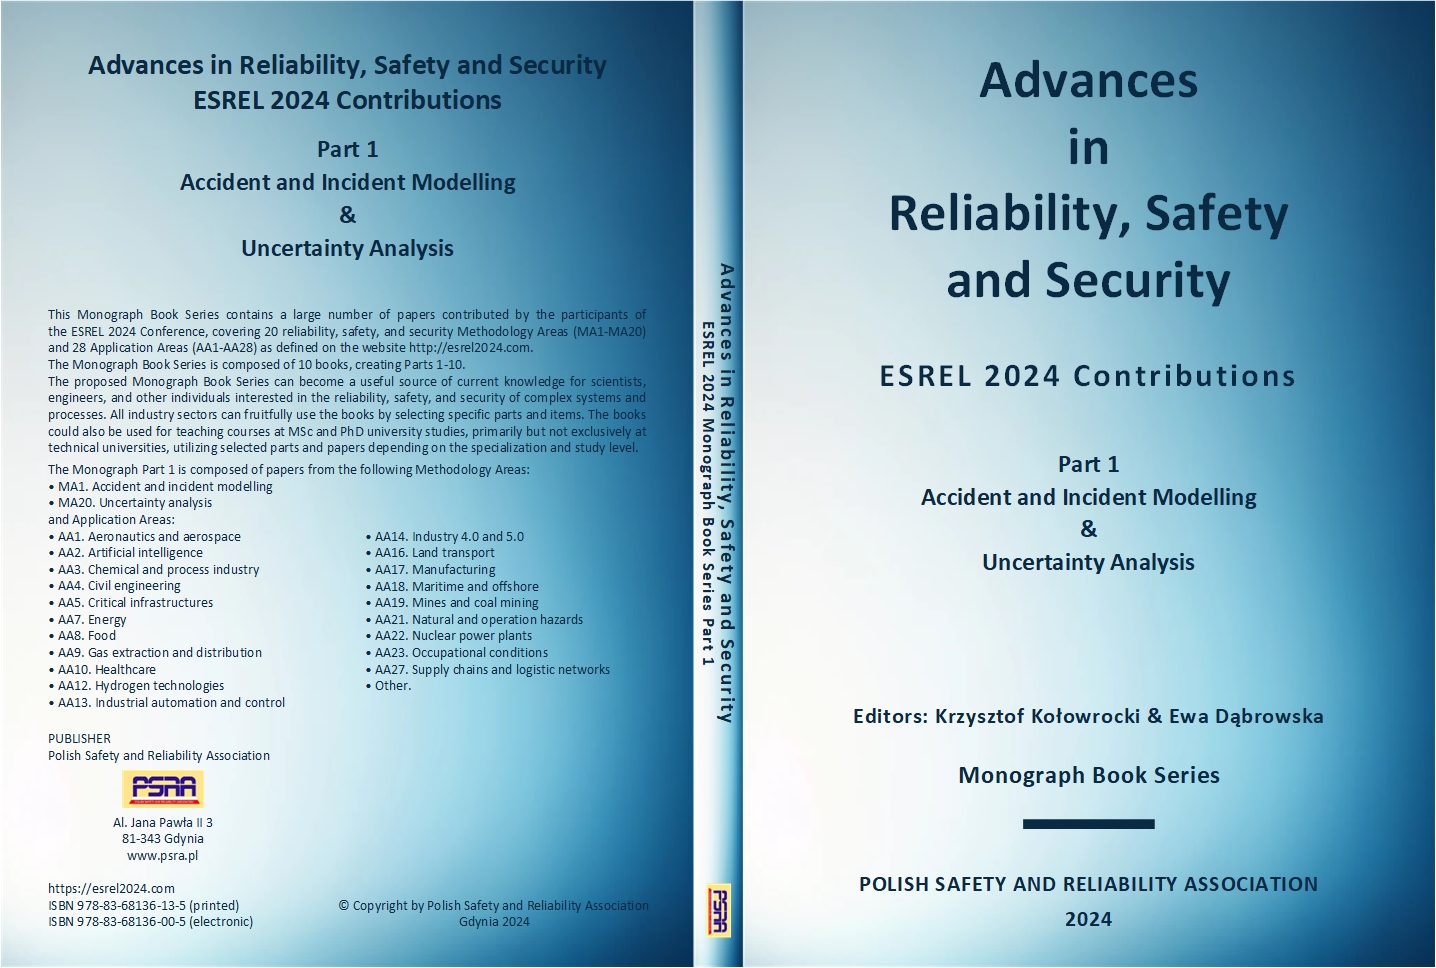 Part 1 Accident and Incident Modelling & Uncertainty Analysis